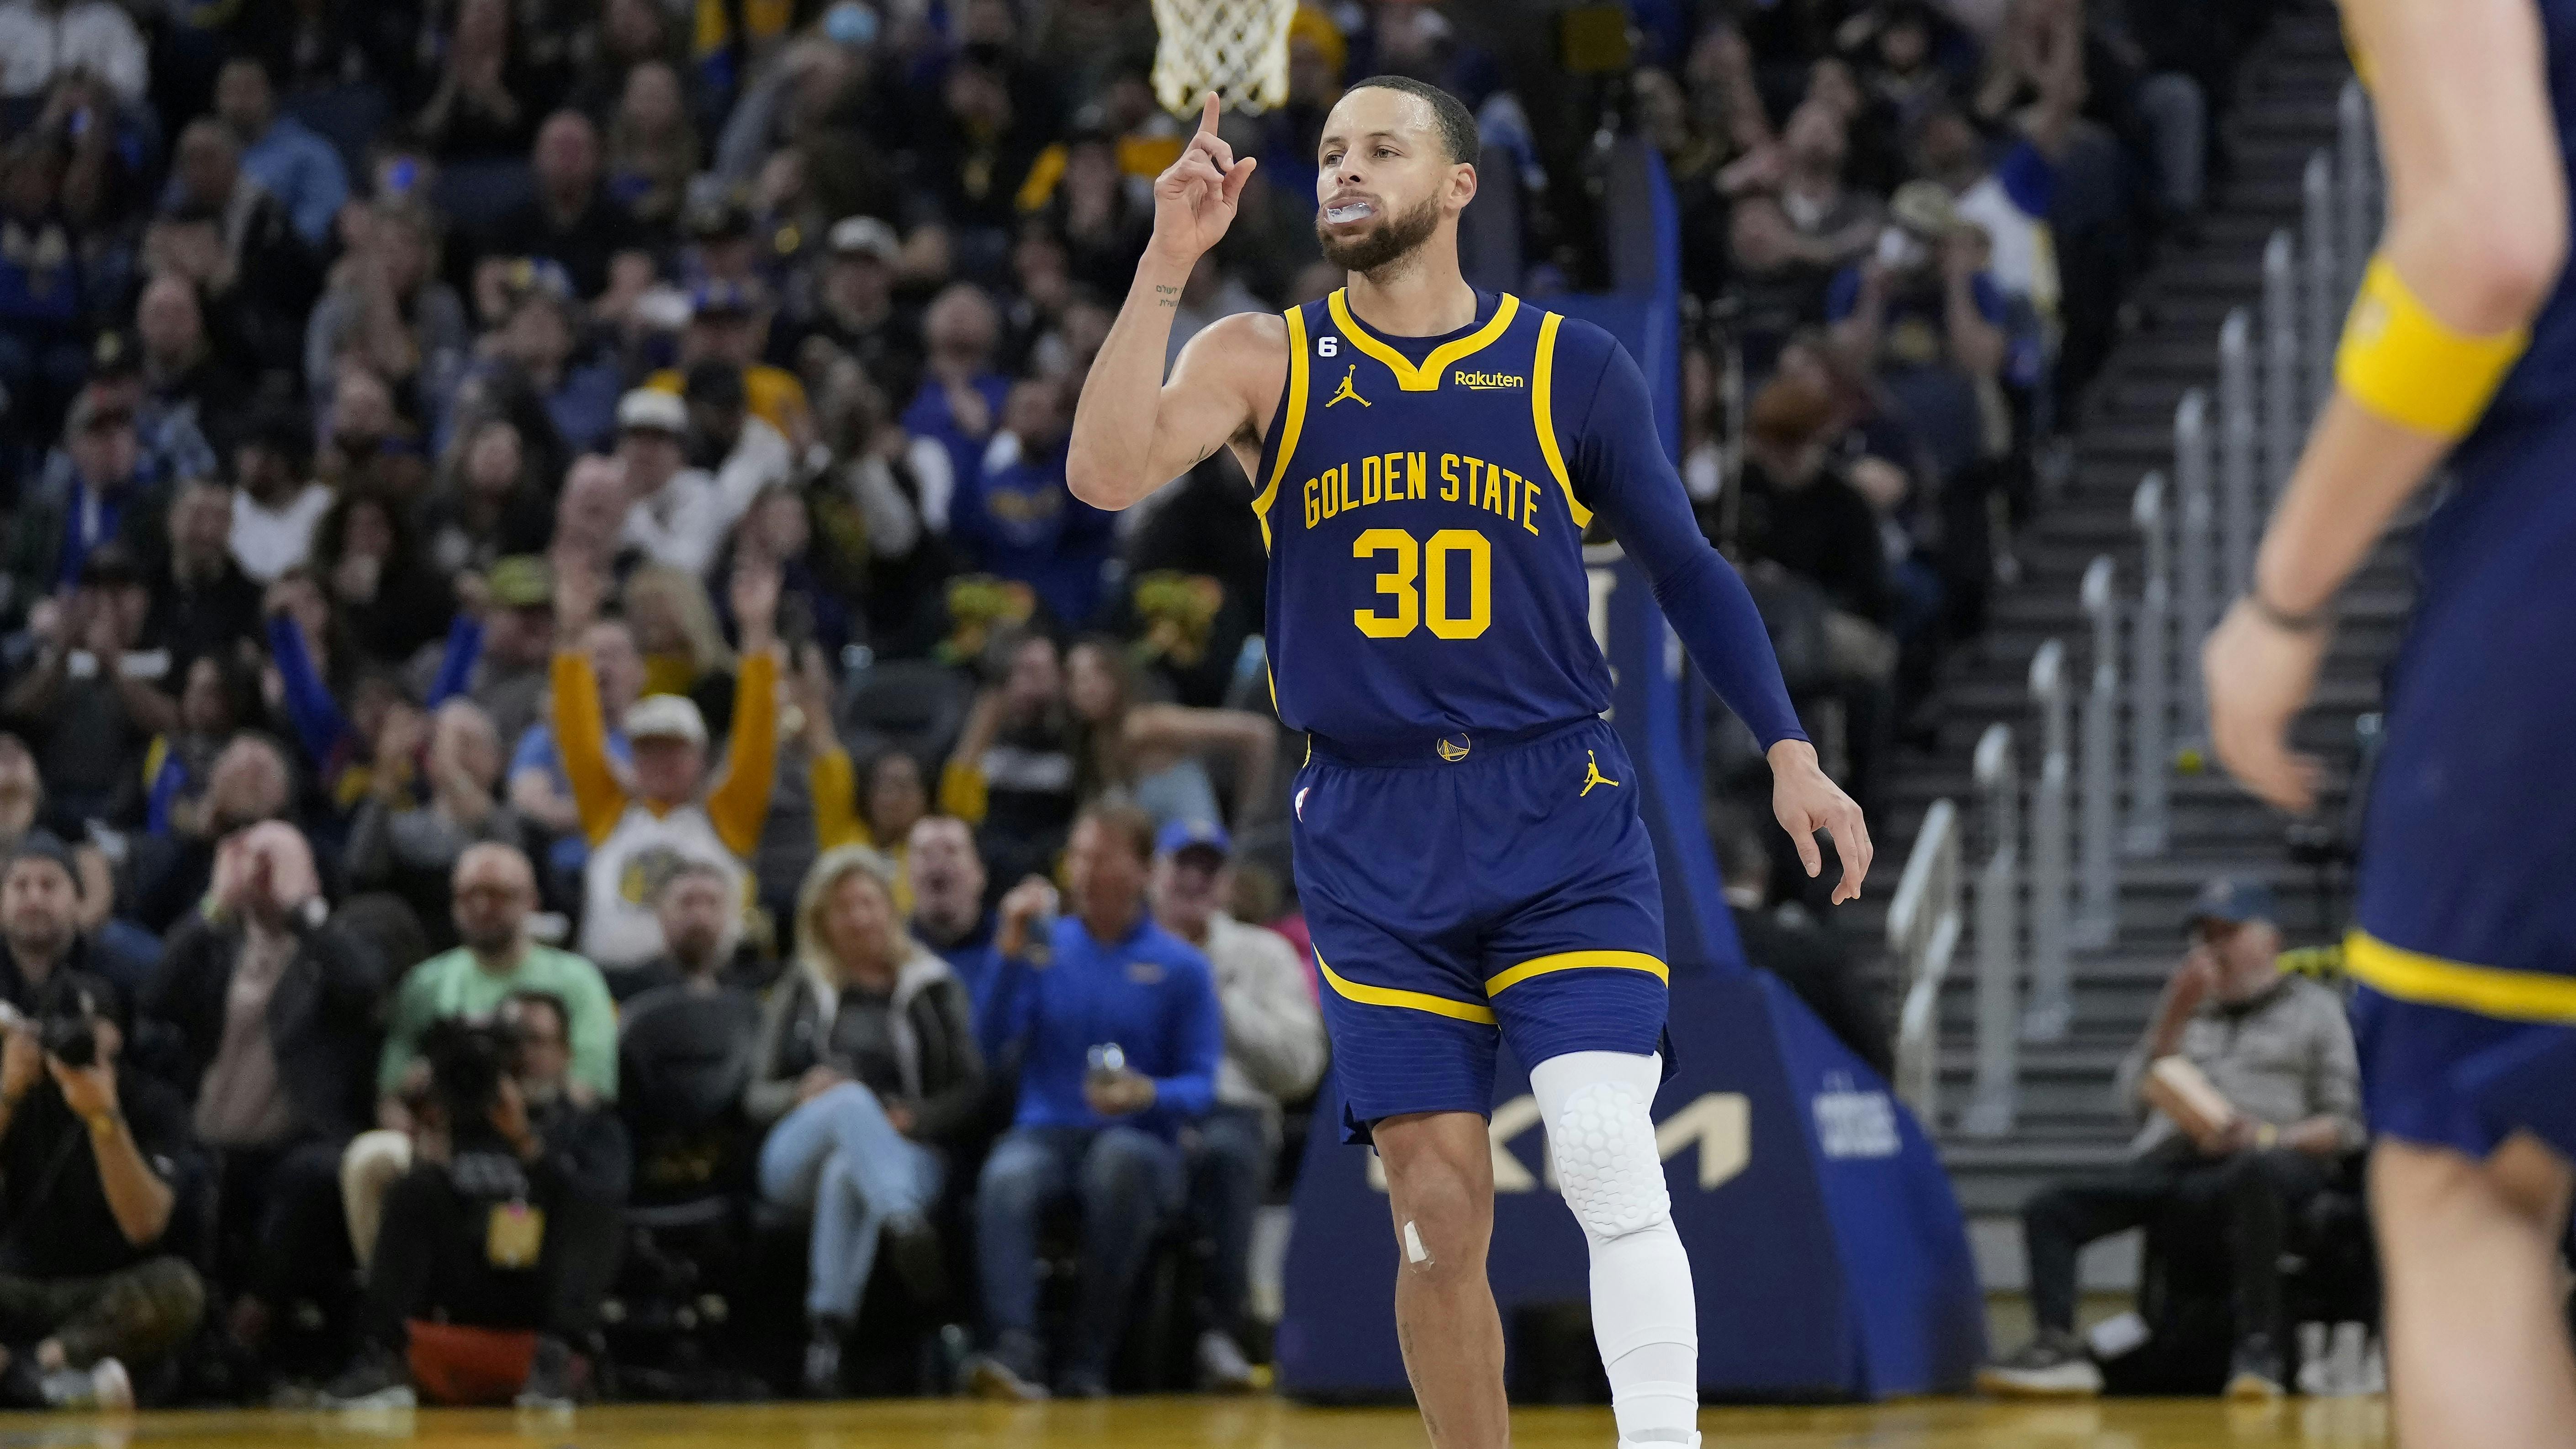 Without Stephen Curry, Golden State has little room for error in playoff chase